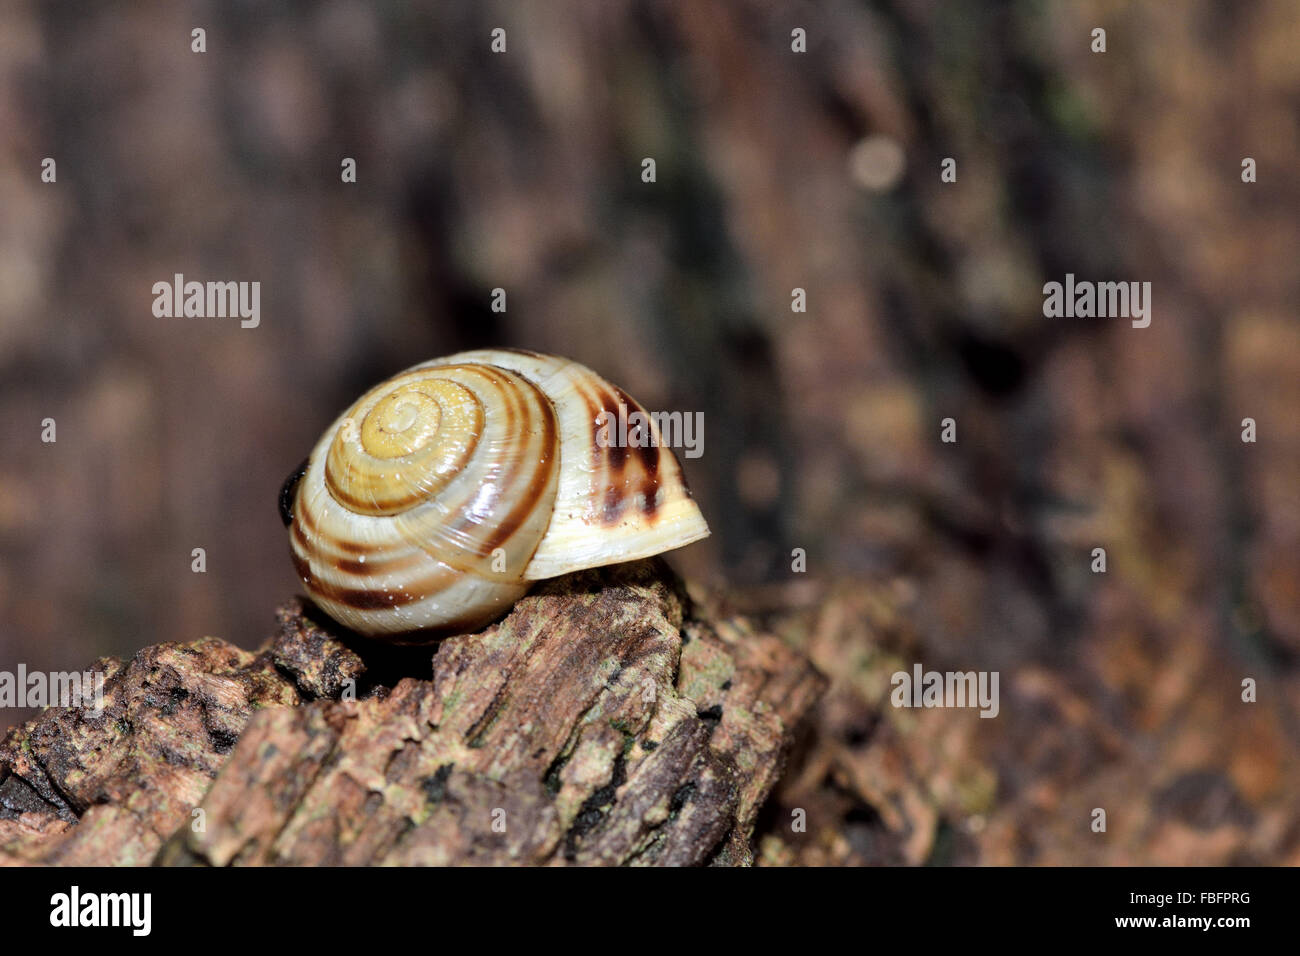 White-lipped snail (Cepaea hortensis). A snail in the family Helicidae on dead wood Stock Photo